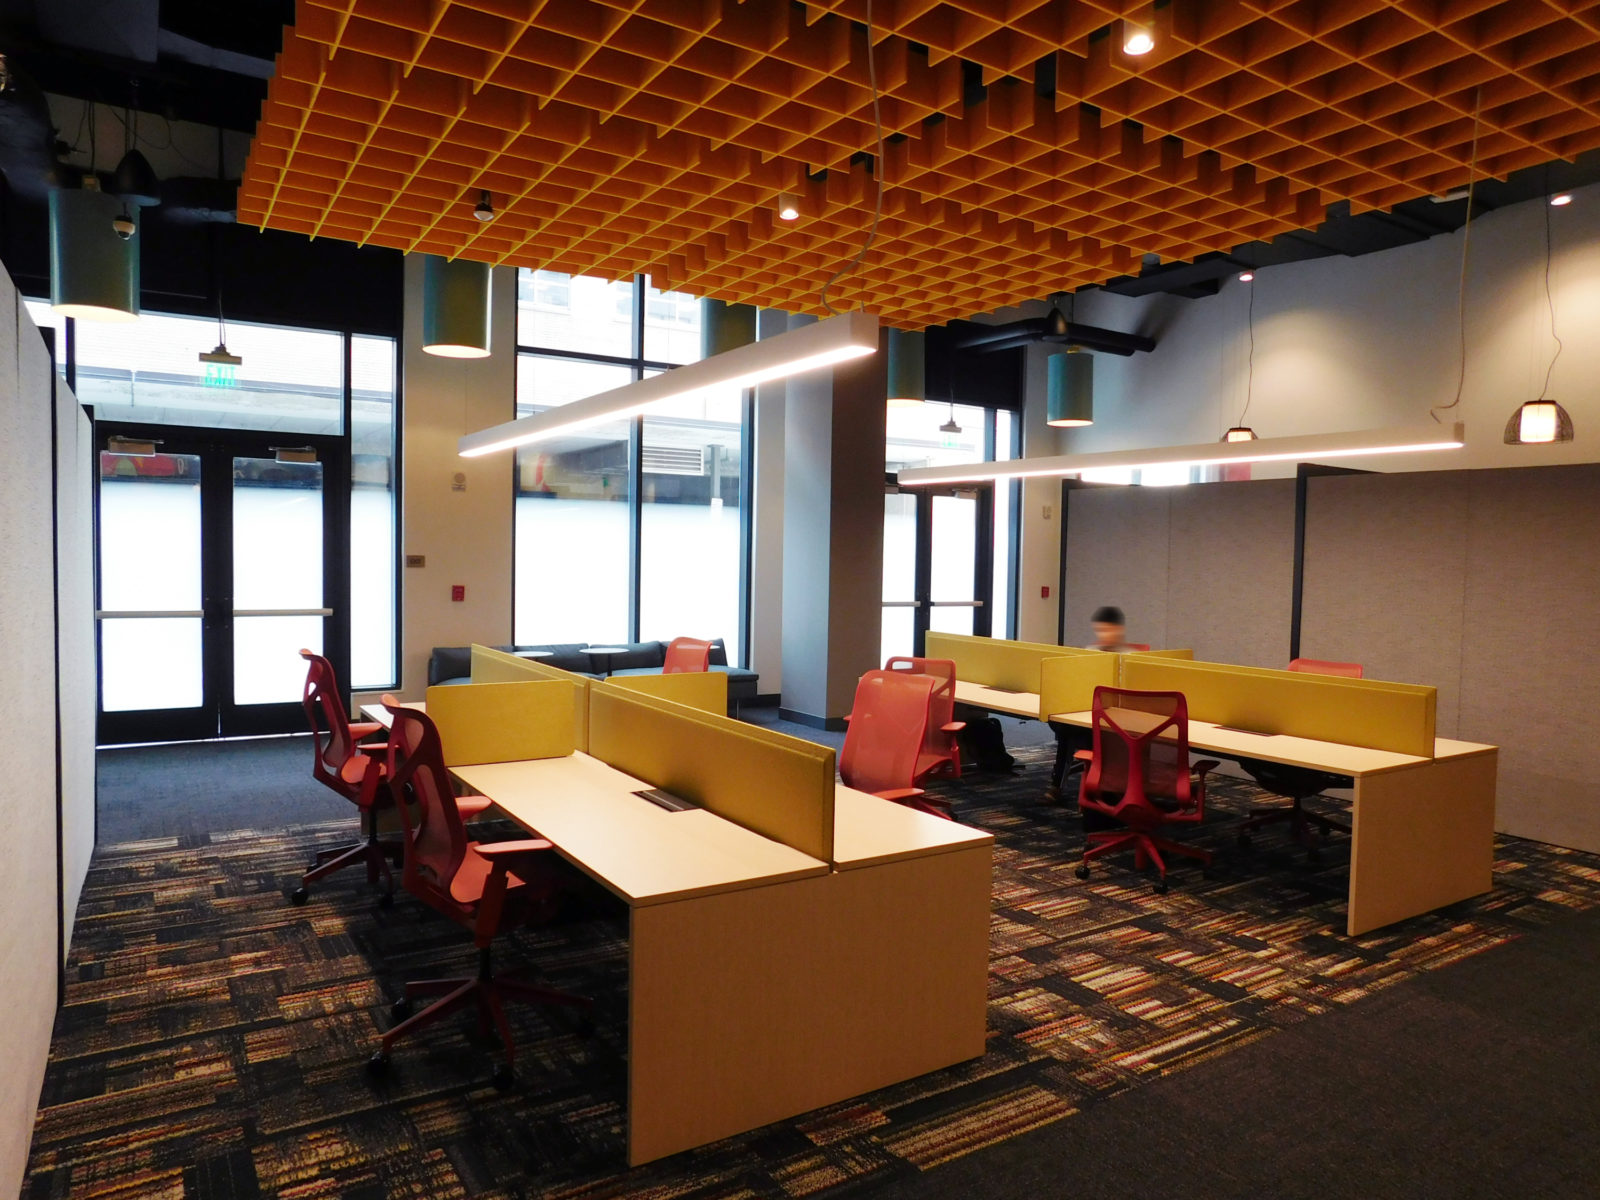 Two clusters of benching workstations with mustard yellow fabric screens on surface and red Herman Miller Cosm chairs at each spot. Acoustic panels above.